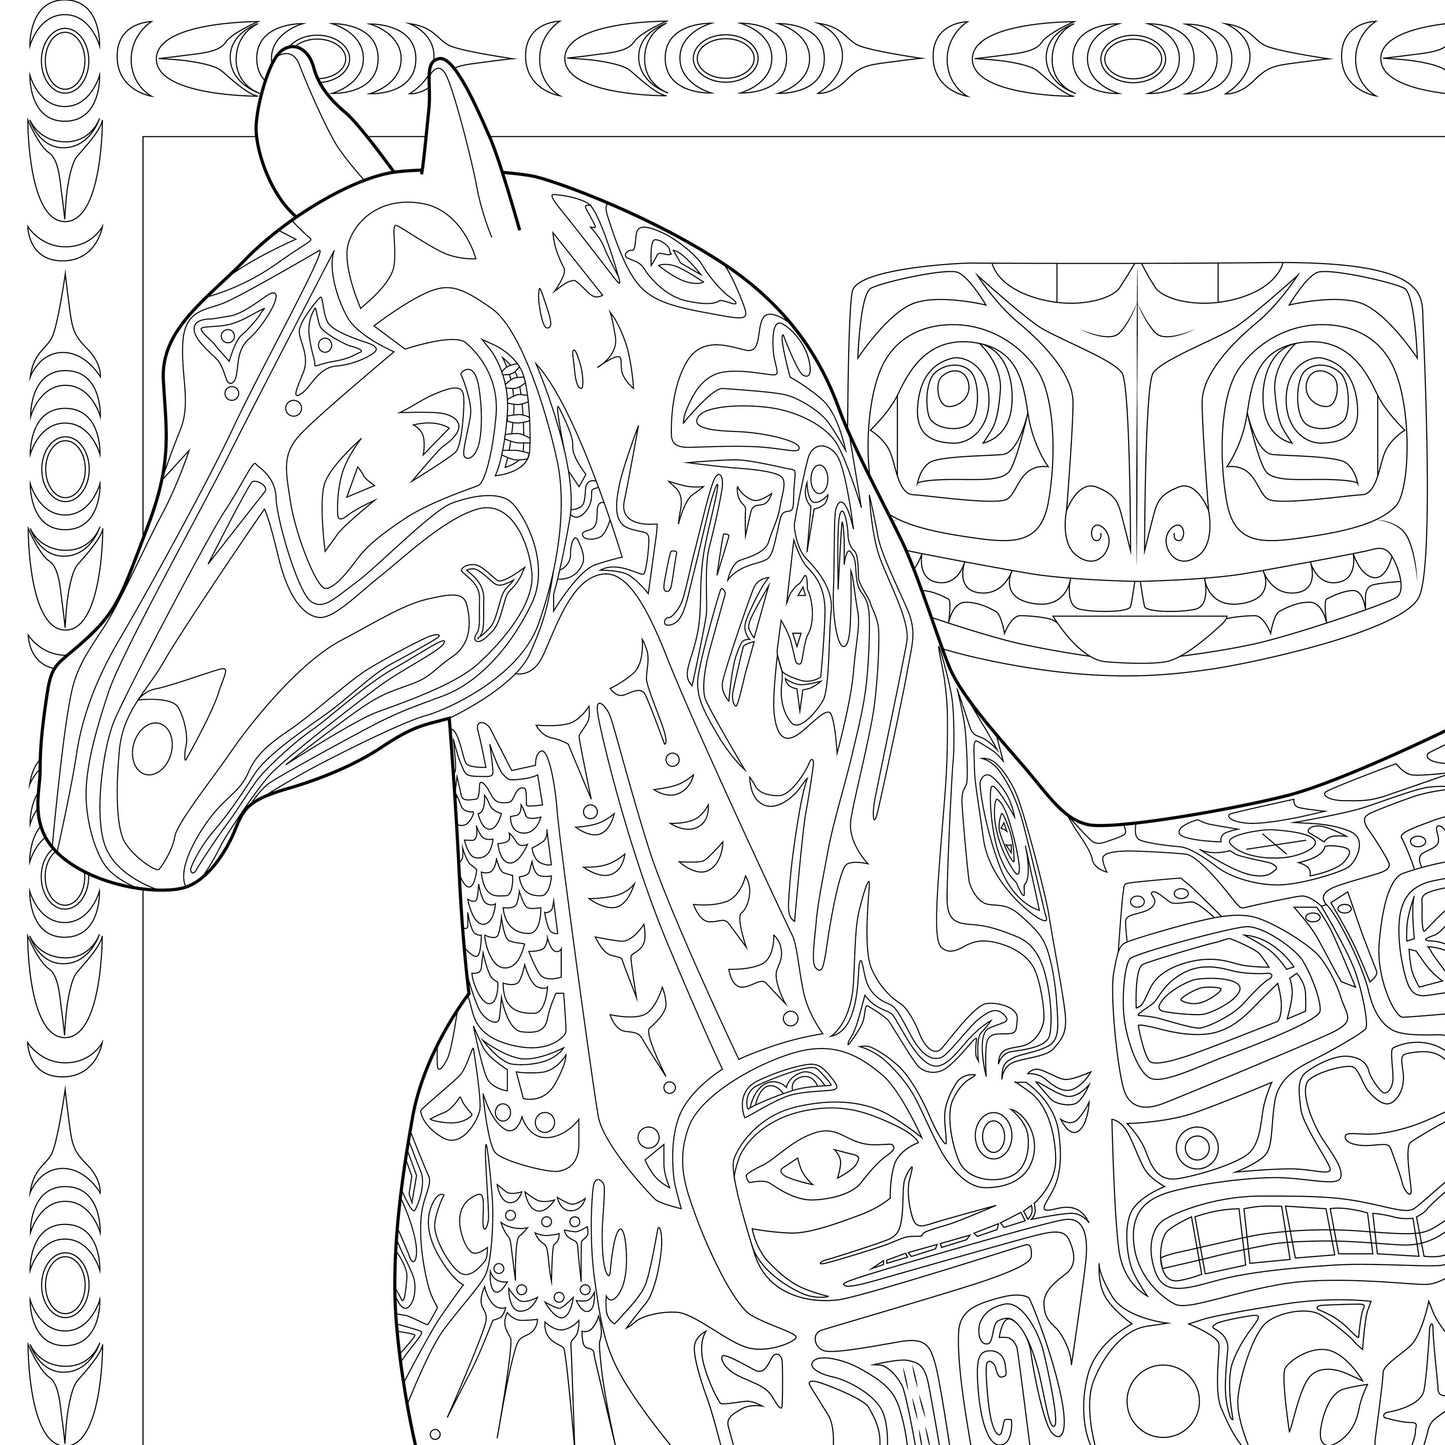 The Trail of Painted Ponies Adult Coloring Book - Native American Edition